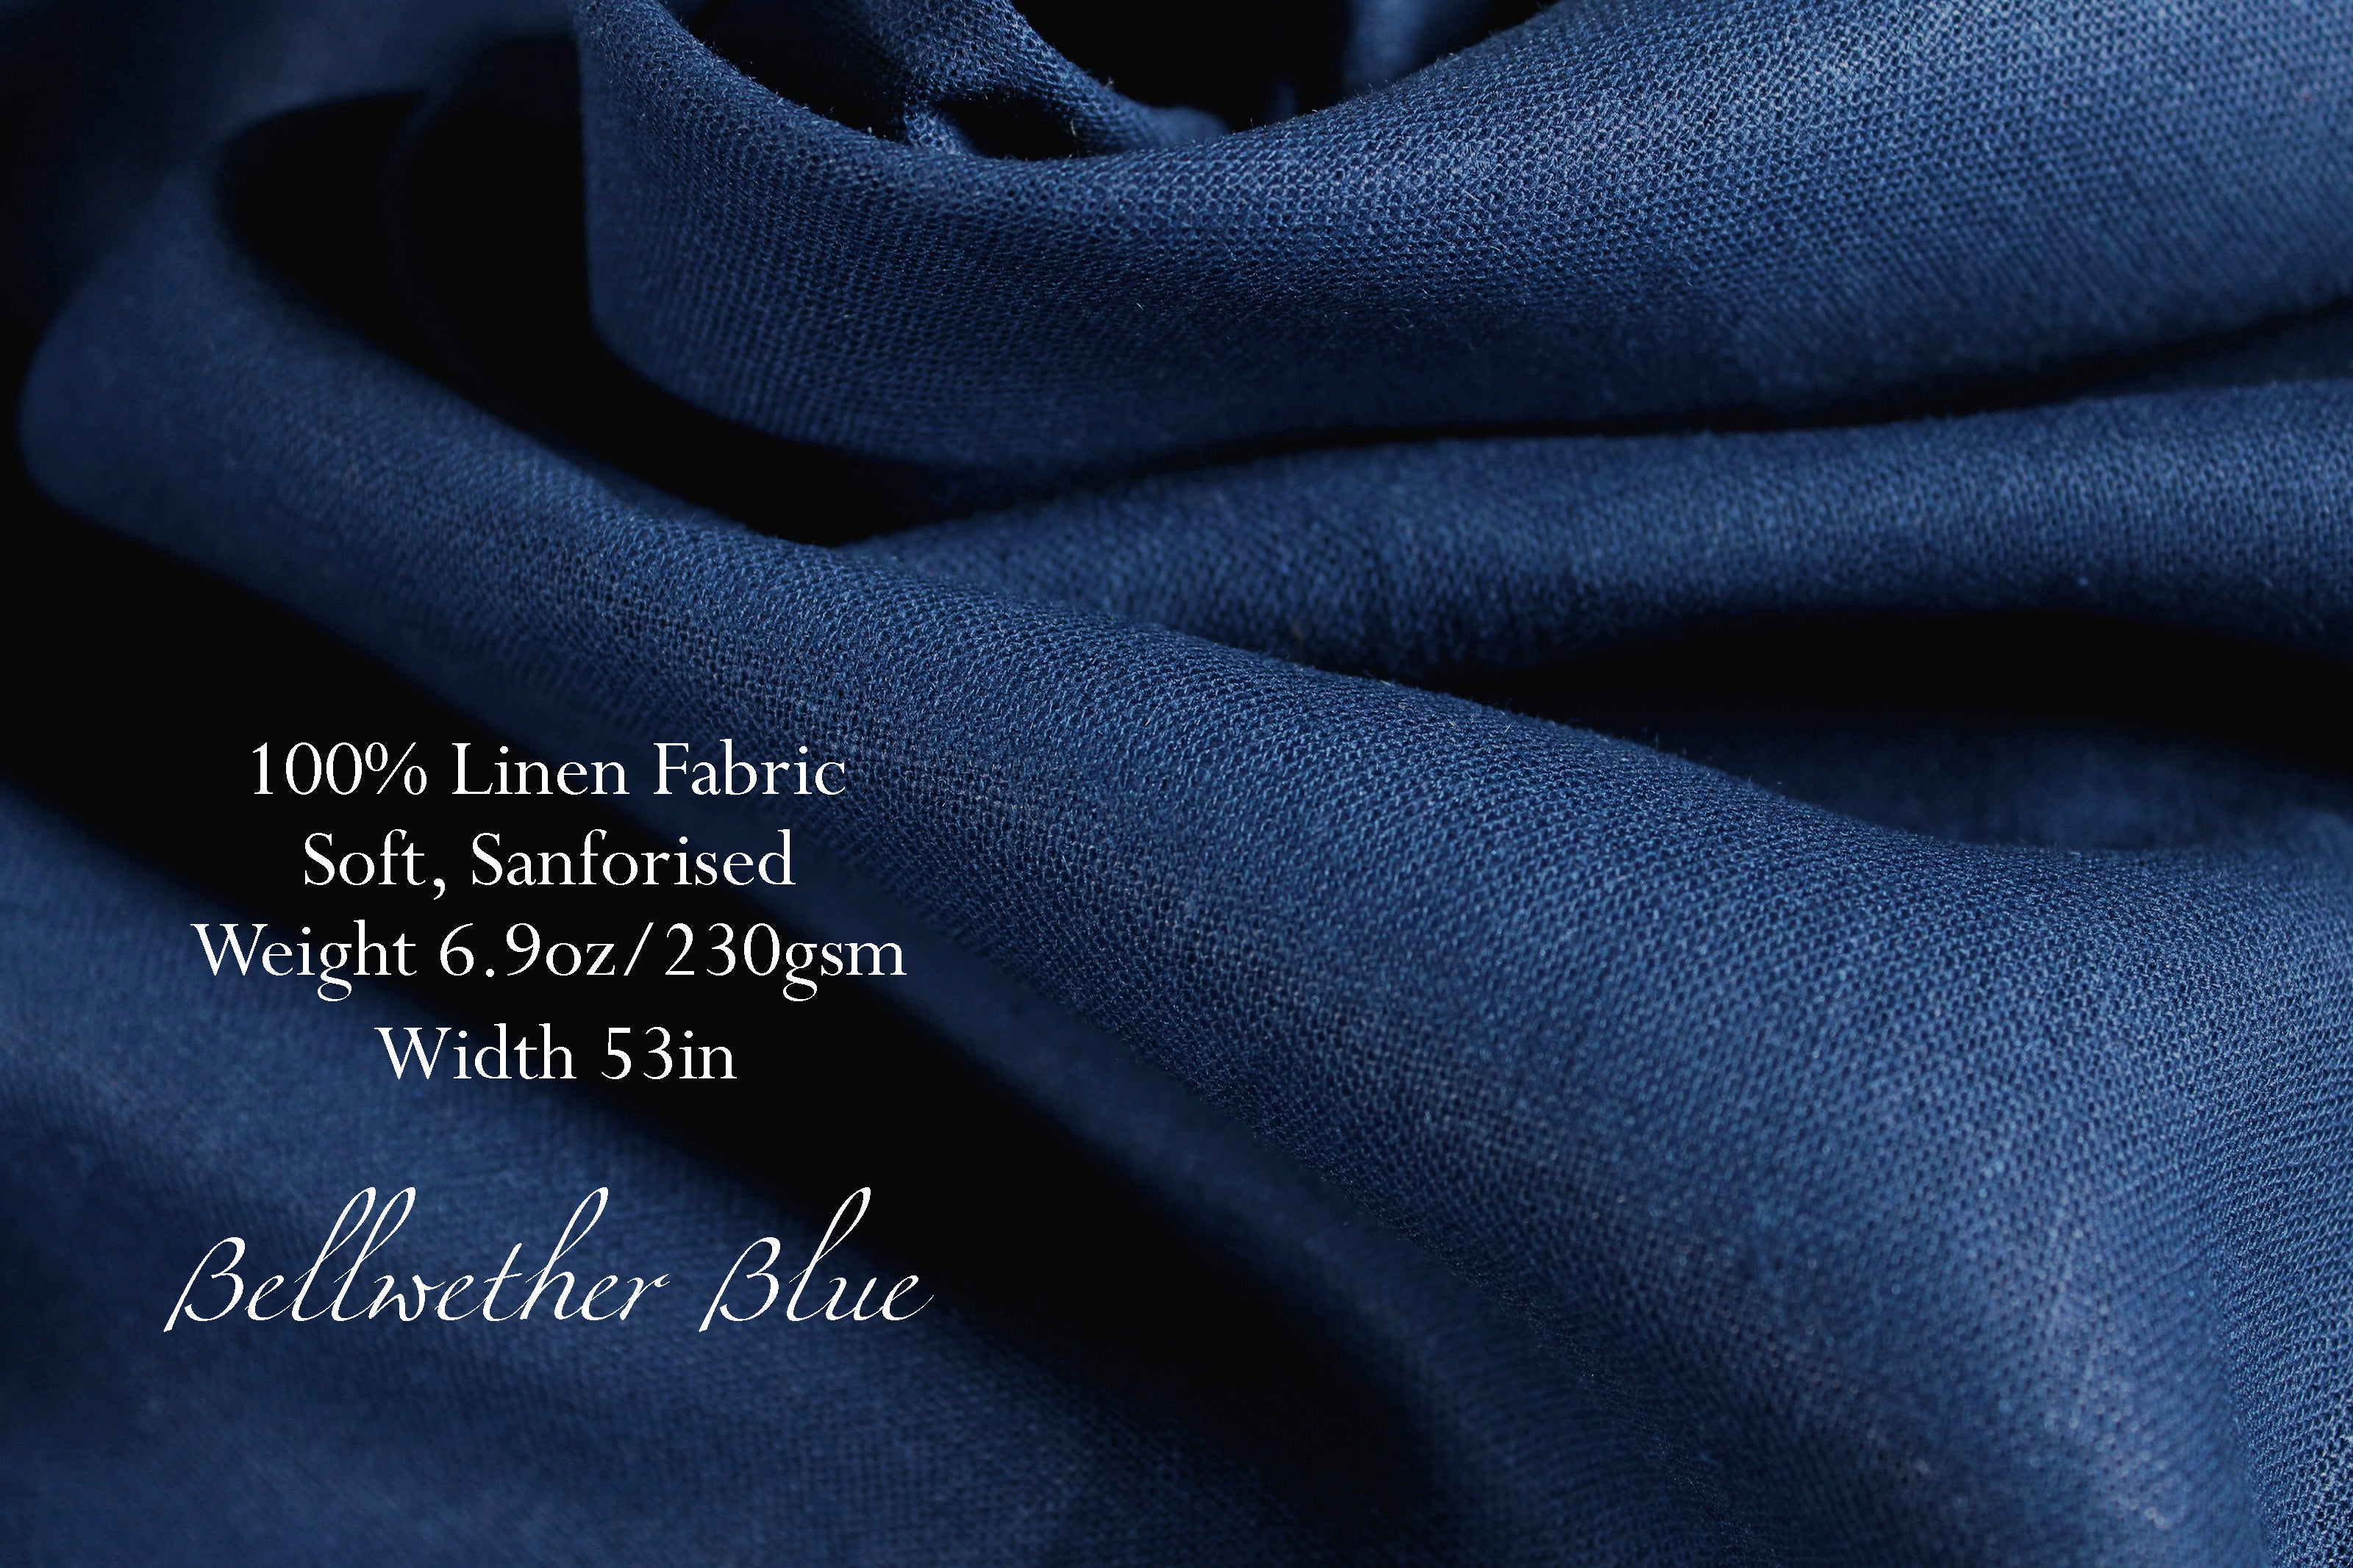 NEW LINEN FABRIC COLLECTION!!! / 100% Linen Fabric by the Yard / Bellwether blue Linen Fabric / Buy Linen Online